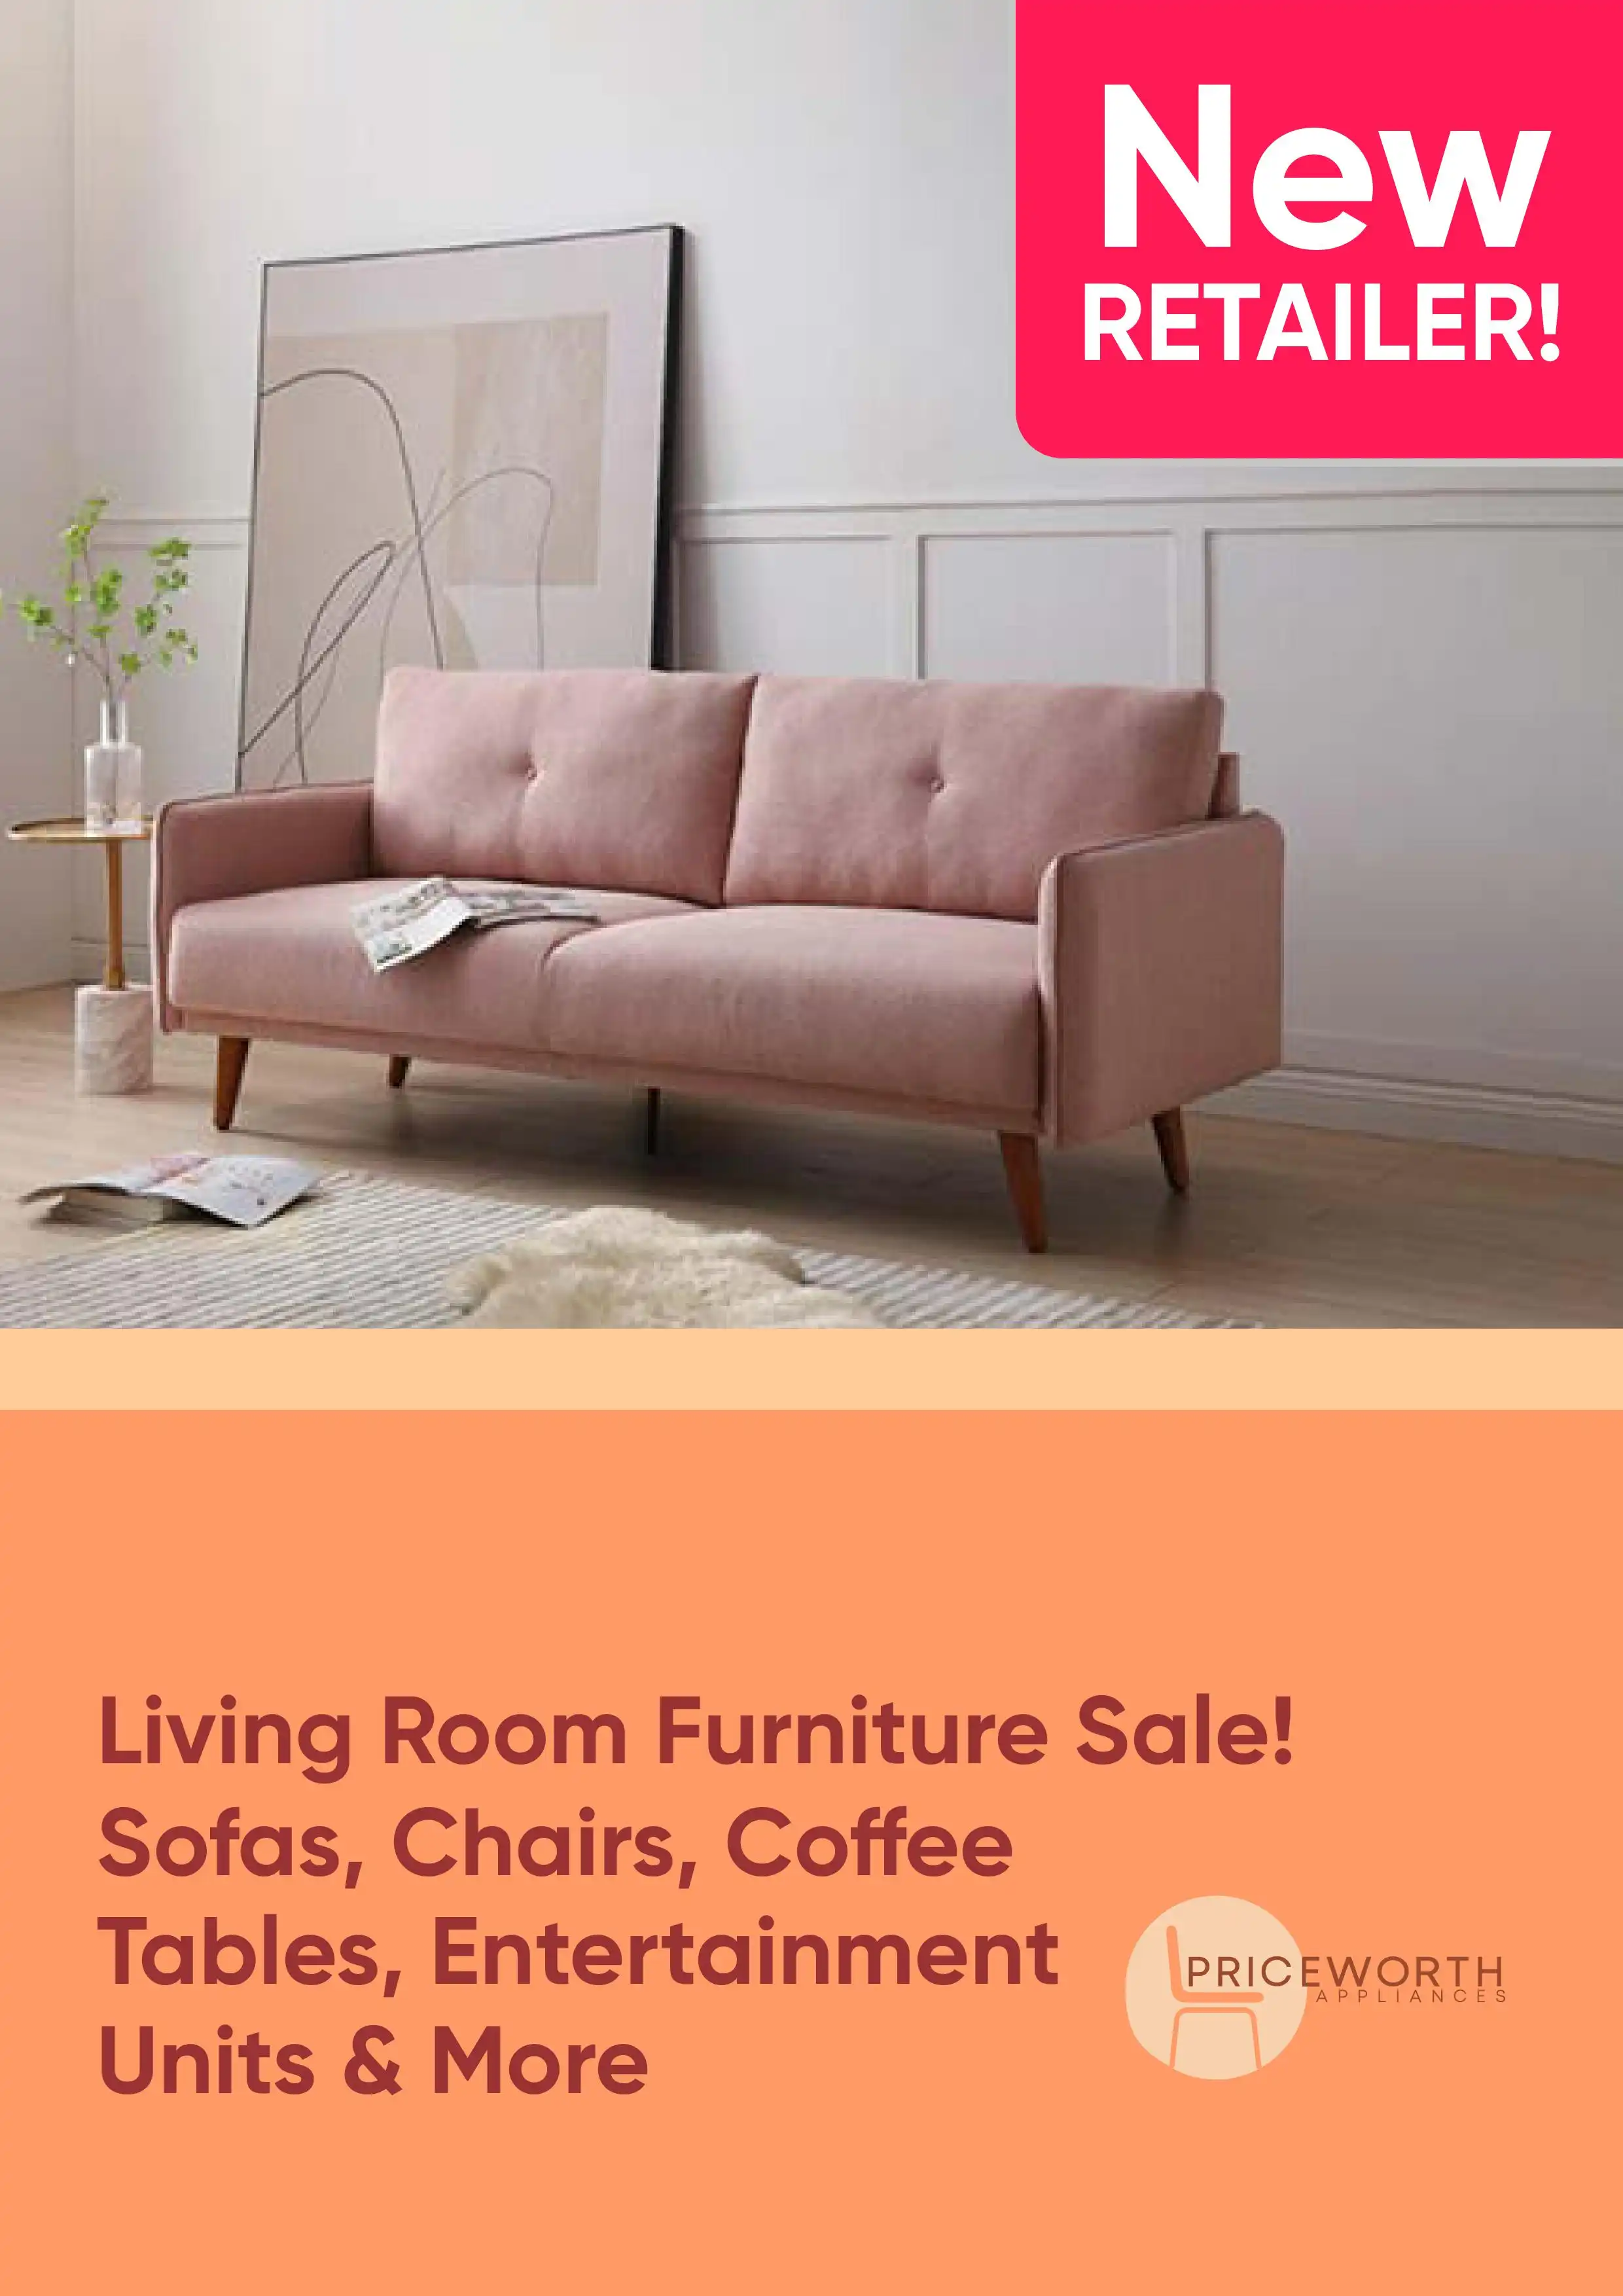 Living Room Furniture Sale! Sofas, Chairs, Coffee Tables, Entertainment Units & more